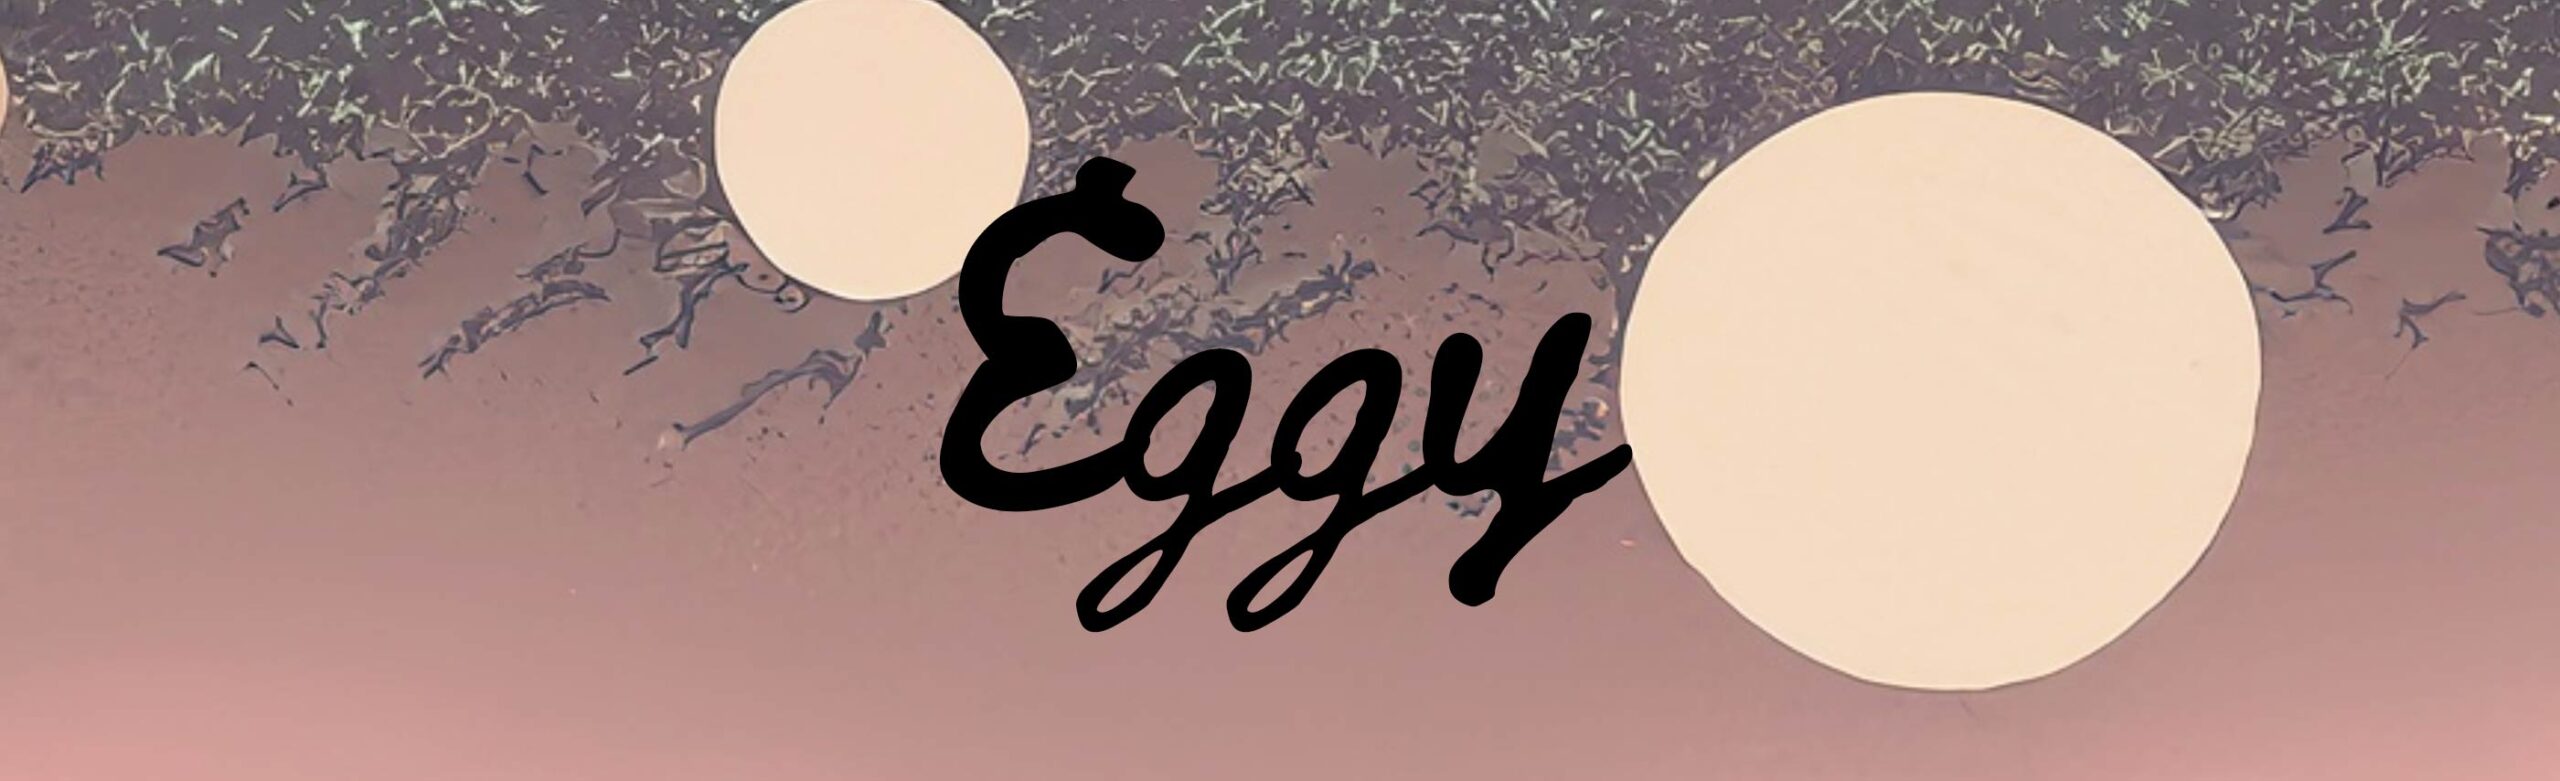 Eggy Adds Concert at The ELM in Bozeman with STiLGONE Image